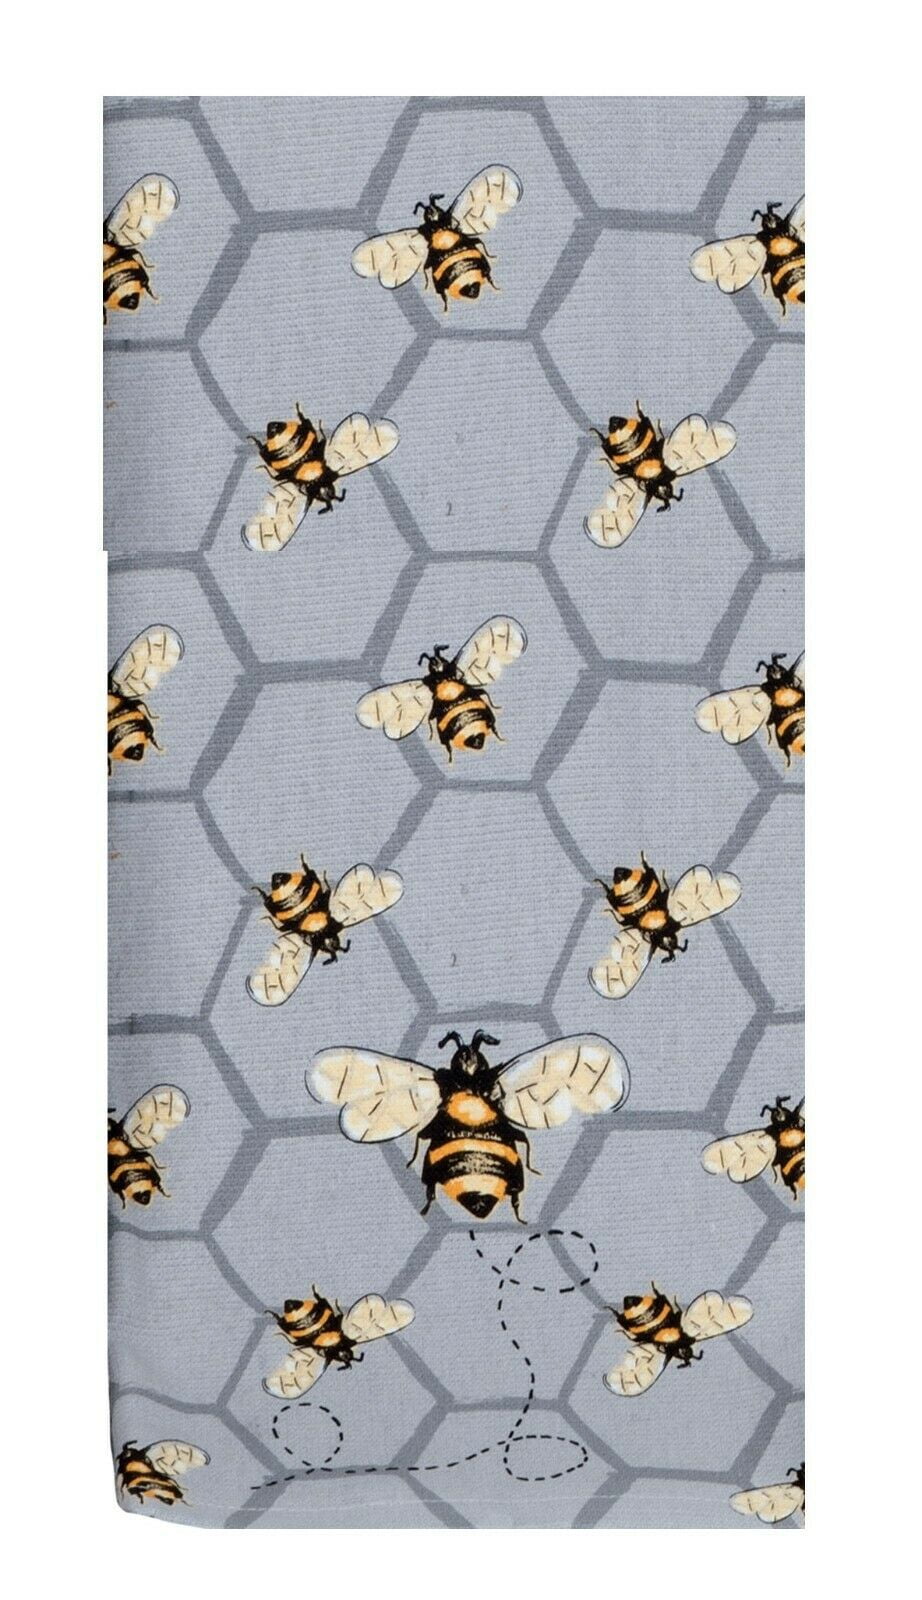 Set of 2 BEE INSPIRED Honey Bee Terry Kitchen Towels by Kay Dee Designs 